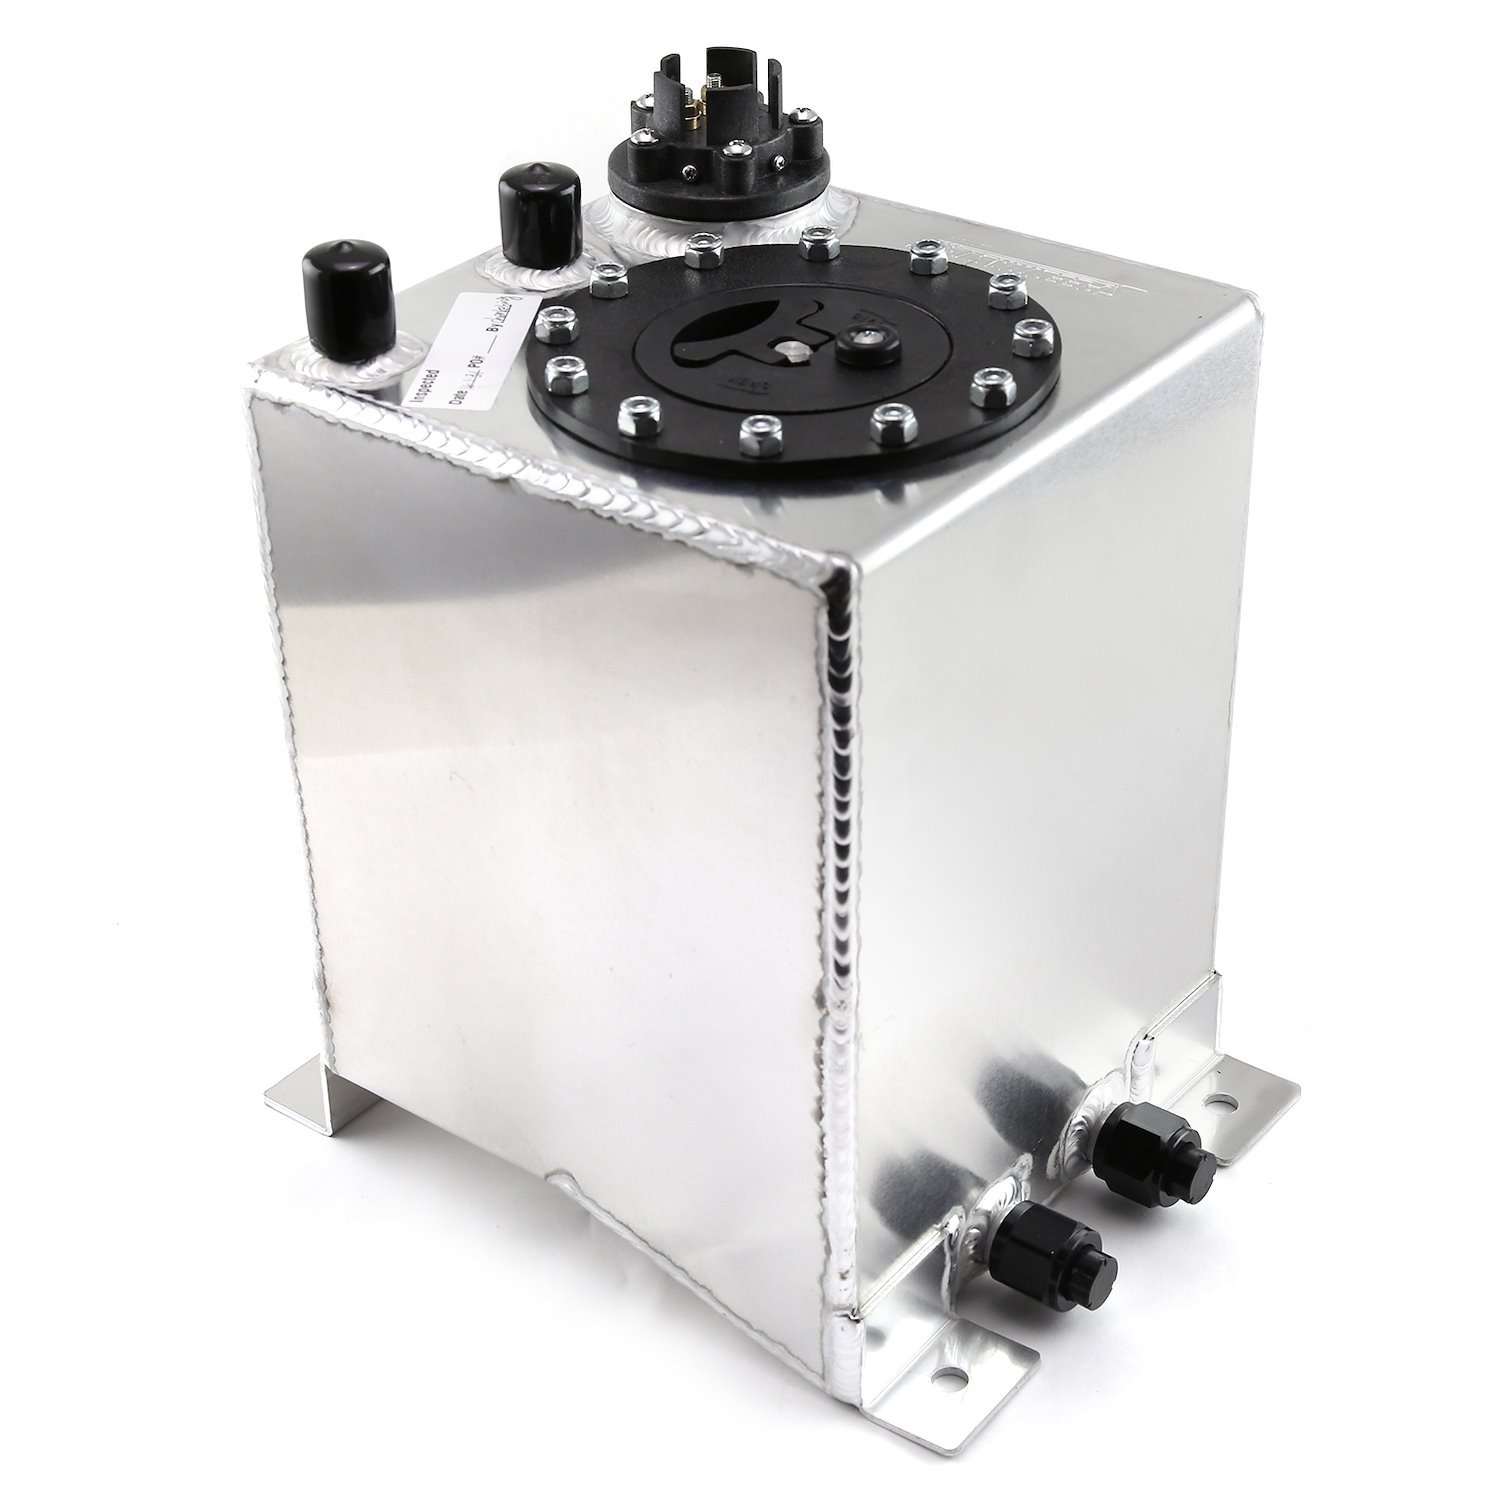 Polished Aluminum Fuel Cell with Sender Capacity: 2.5 Gallons